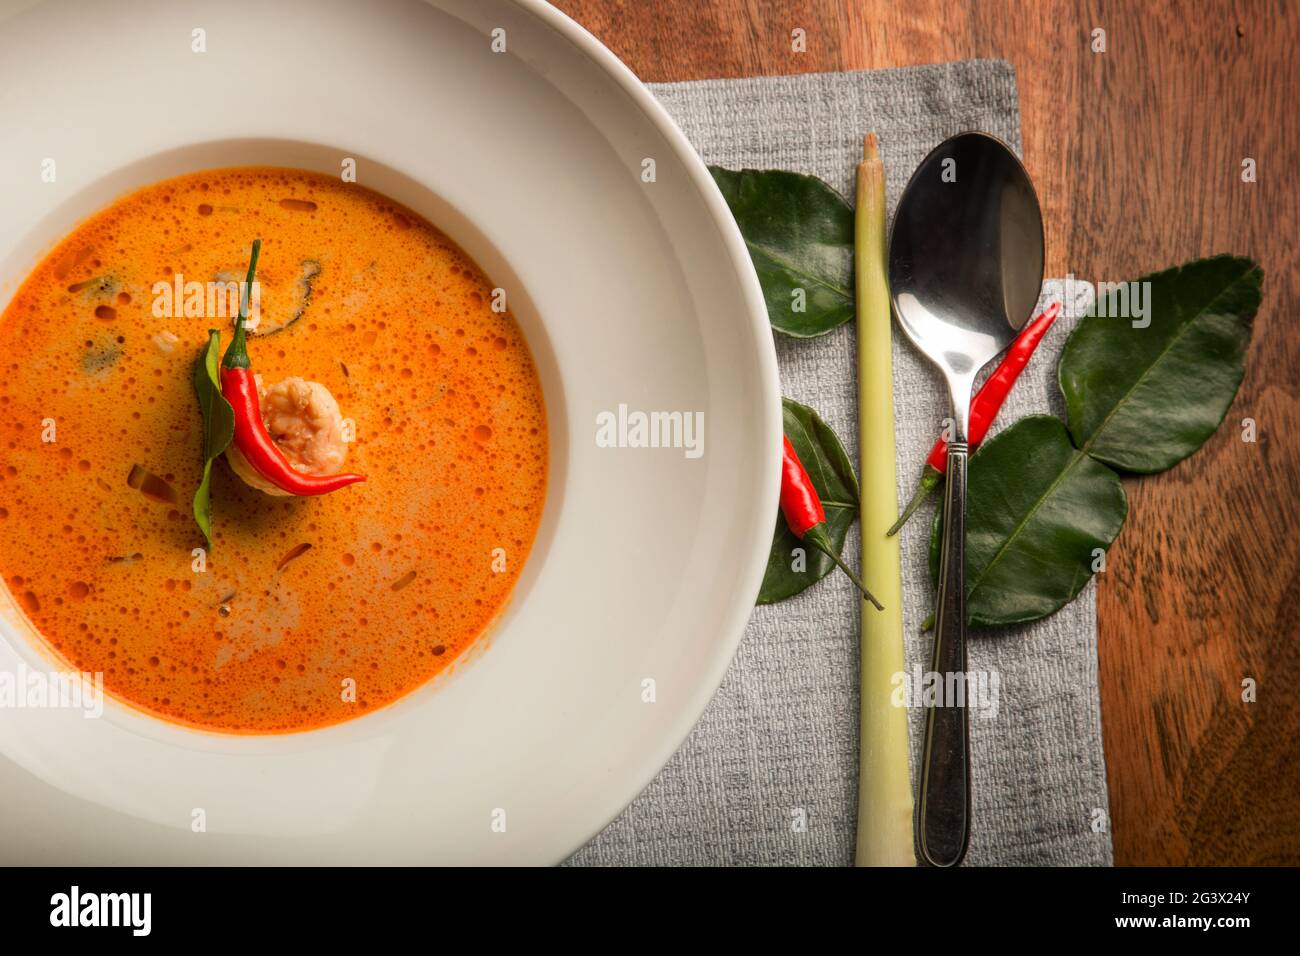 https://c8.alamy.com/comp/2G3X24Y/hot-soup-with-meat-and-vegetables-traditional-russian-meat-soup-bread-spices-and-salt-2G3X24Y.jpg